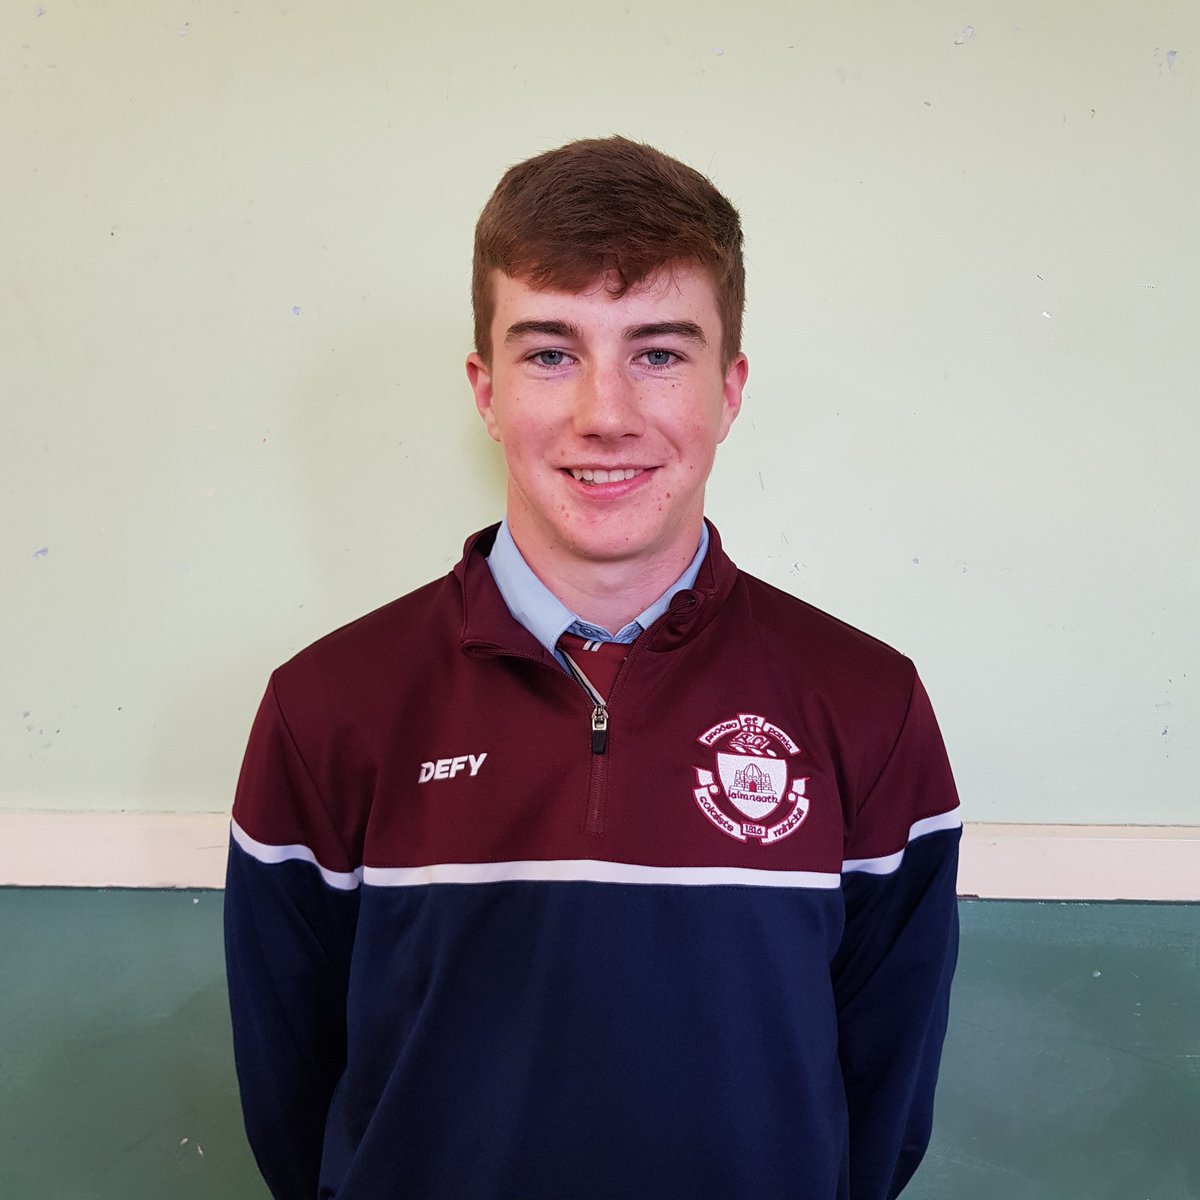 #awardwinningstudents 🏆🏌️‍♂️⛳
Congratulations to Luke Carey who won the first ever Captain's Prize Junior Section in Limerick Golf Club. Well done Luke, fantastic achievement! ⛳🏌️‍♂️🏆